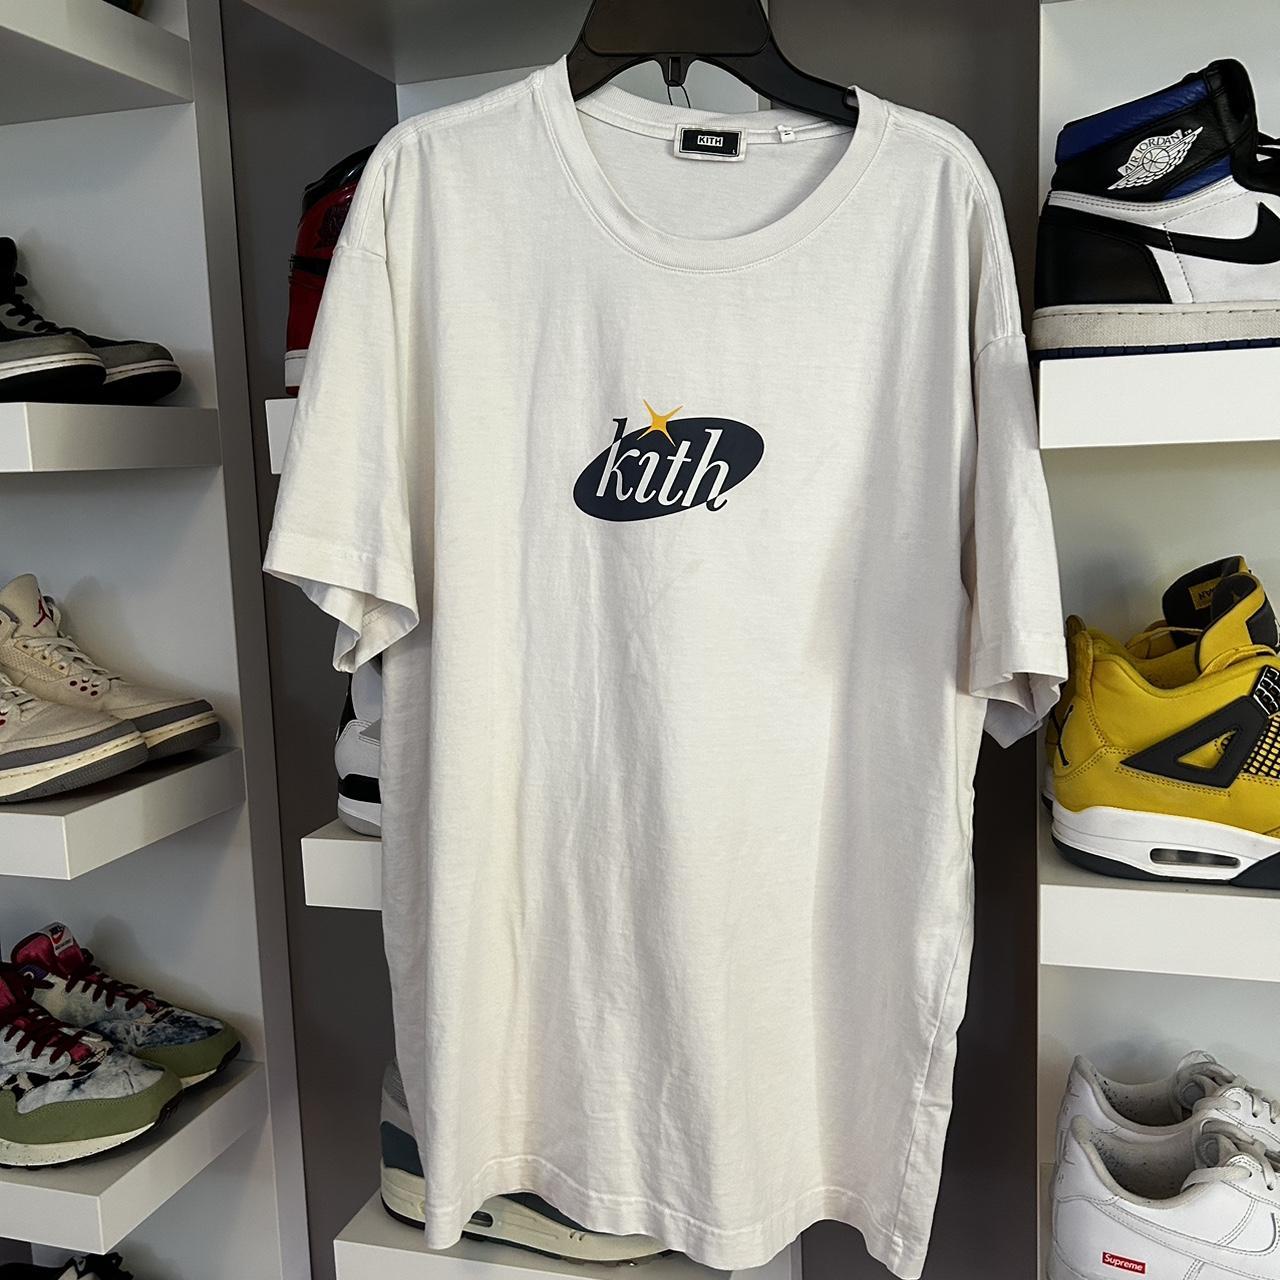 Kith Logo T Shirt Size L Worn condition w some... - Depop